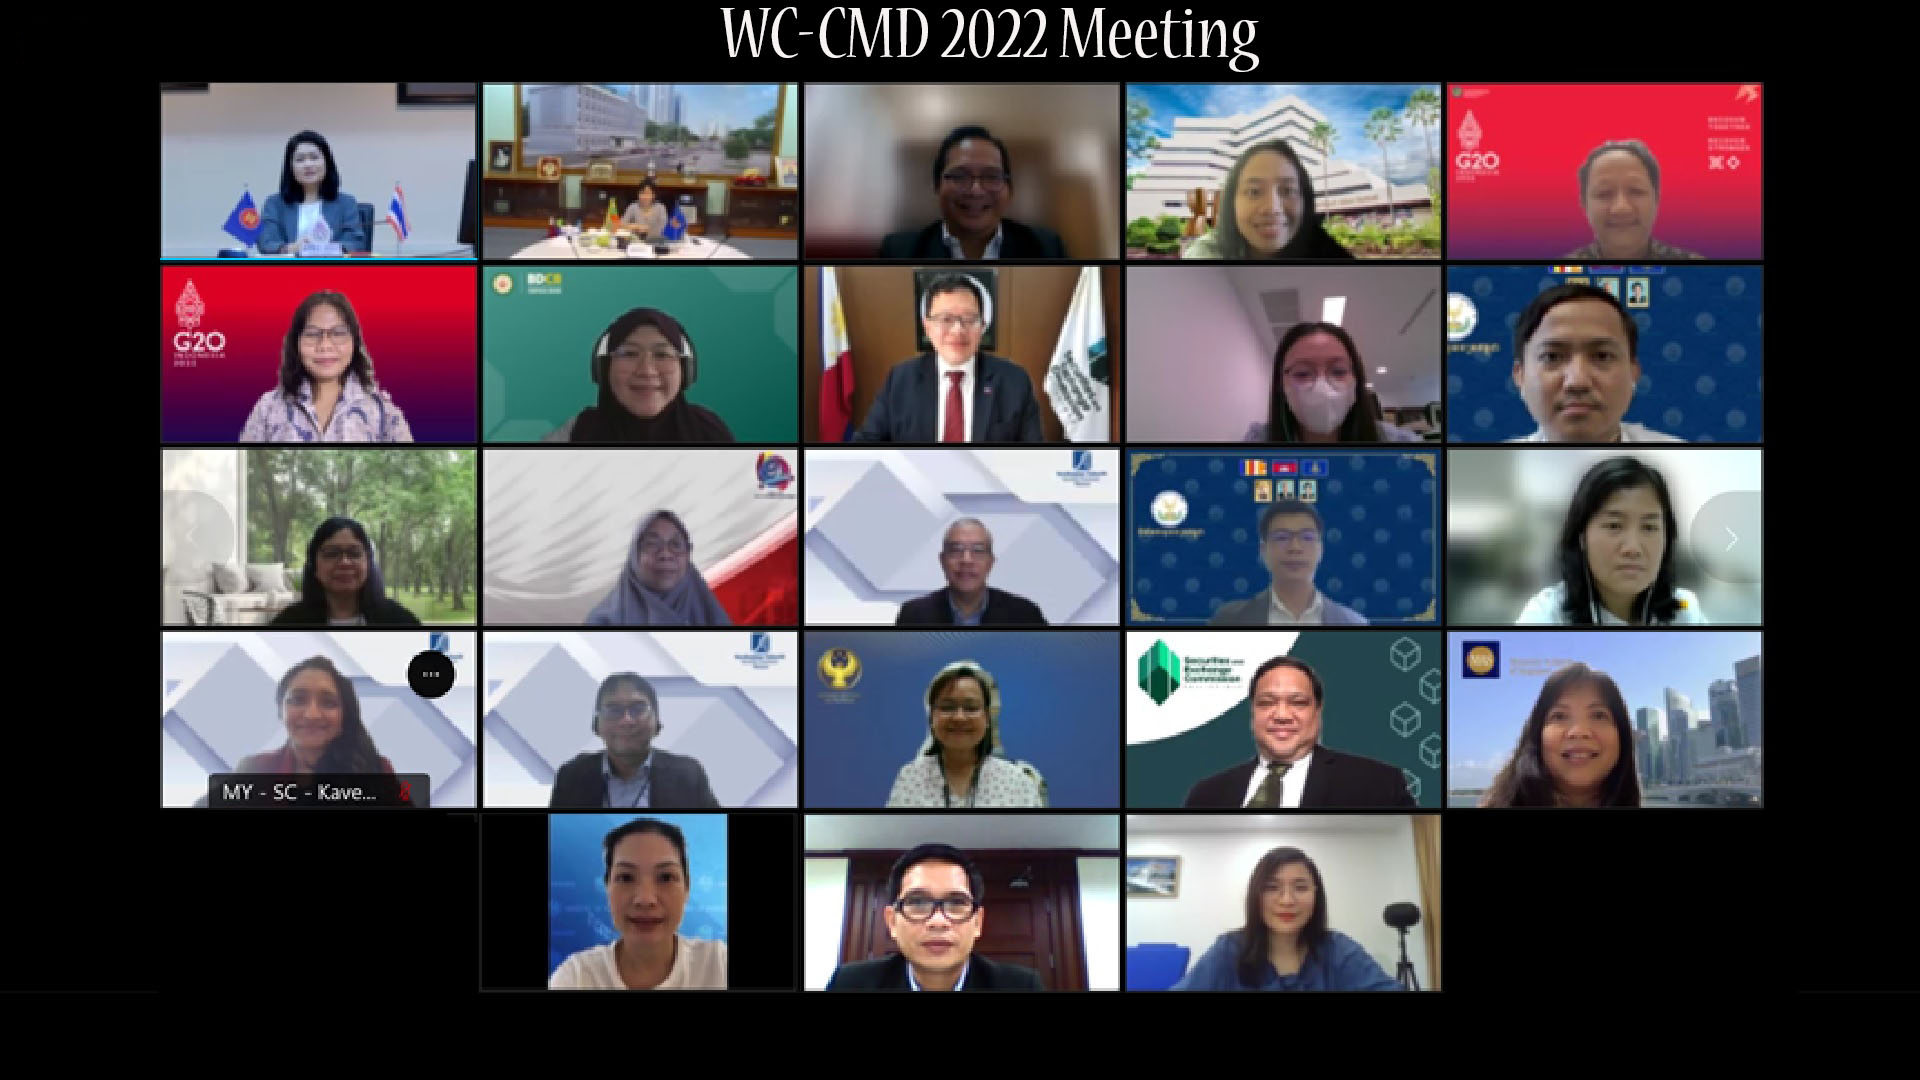 Working Committee on Capital Market Development Meeting, 11 February 2022, Video Conference